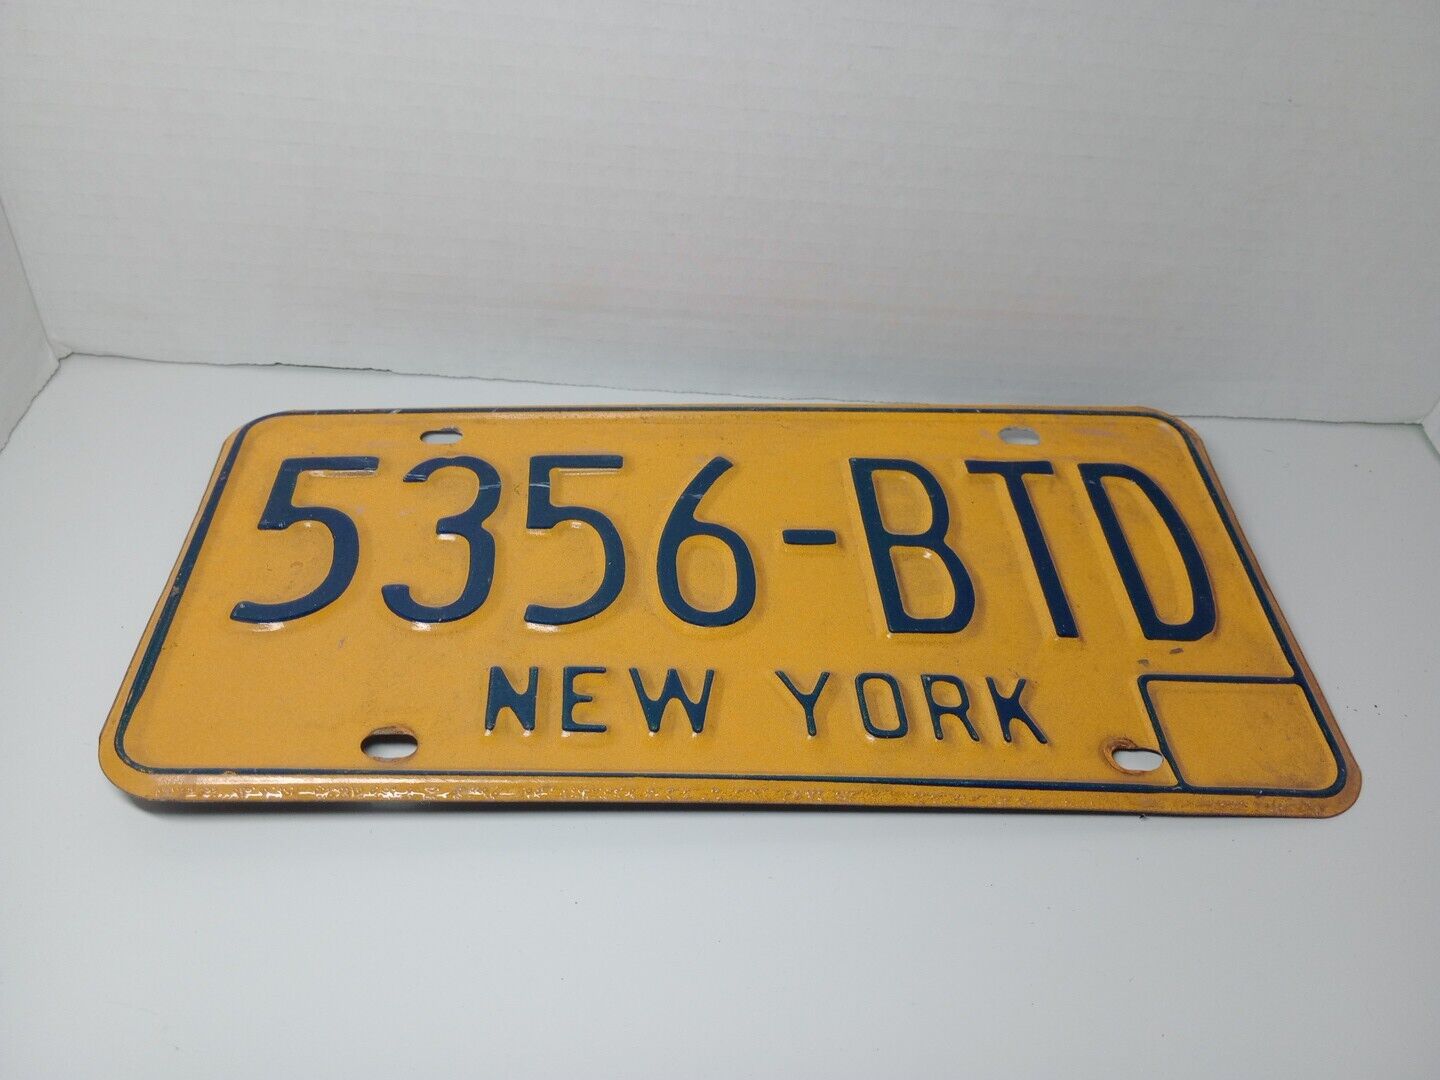 Vintage 1970's New York Yellow and Blue Plate 5356-BTD